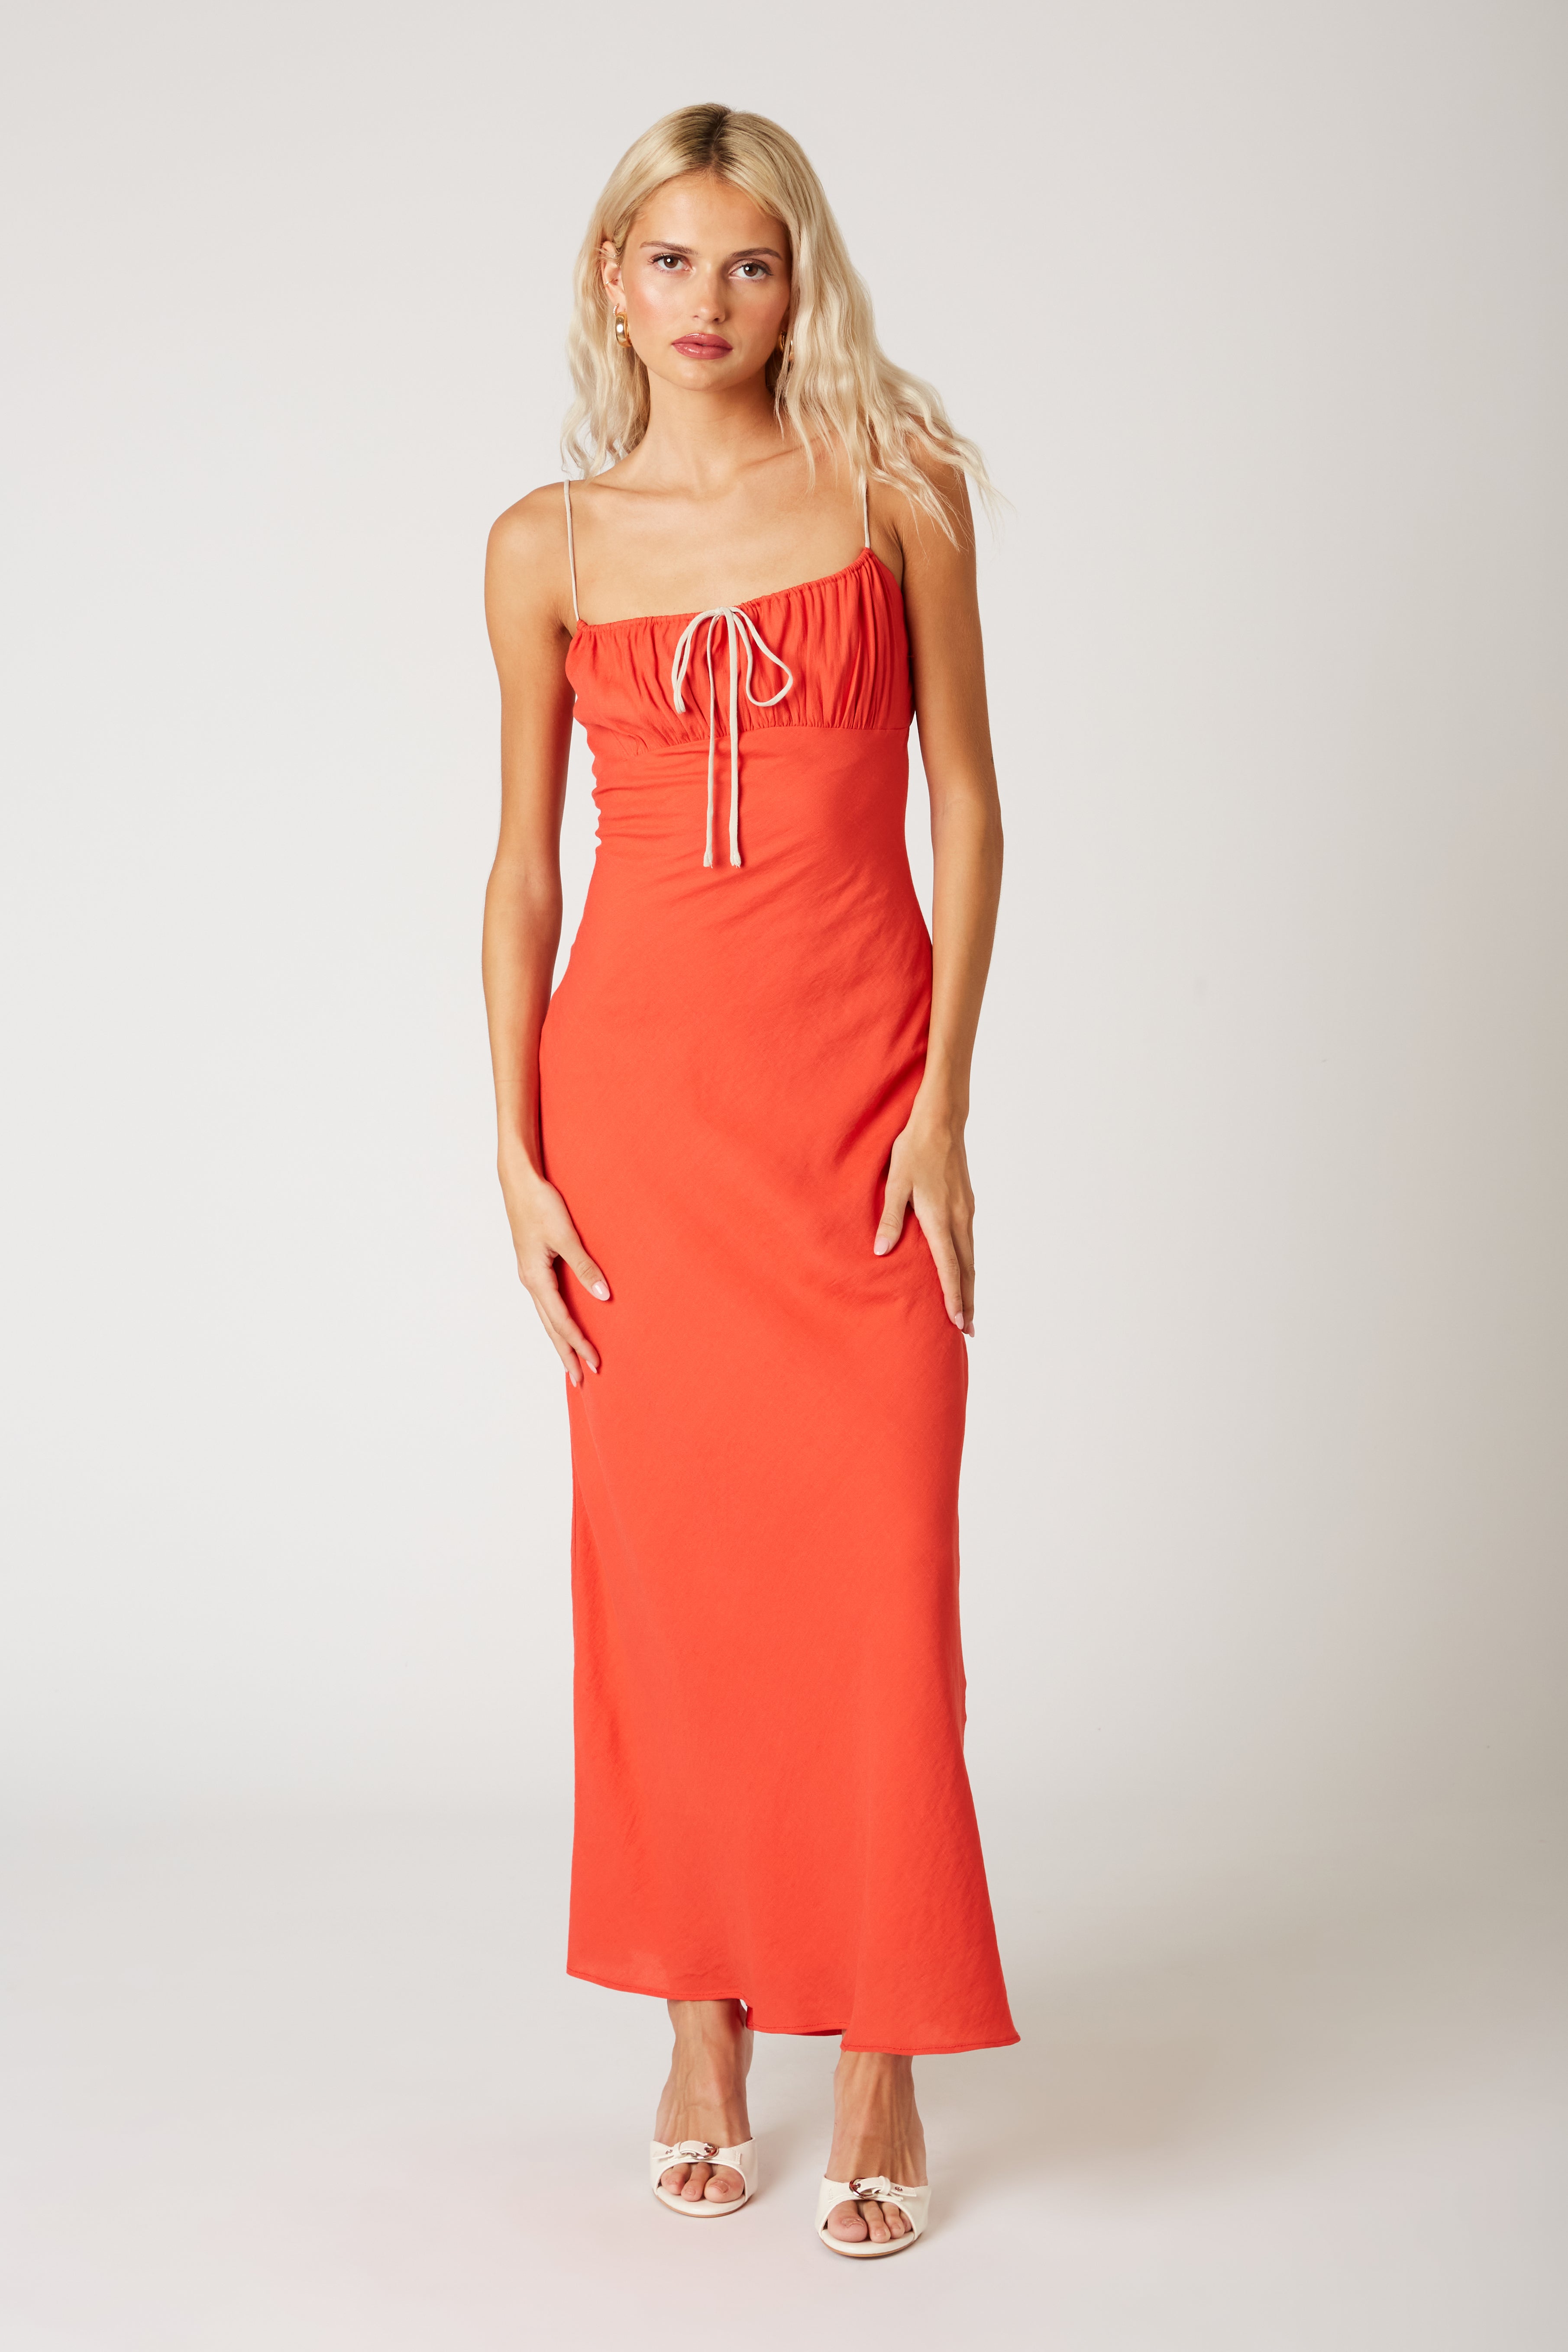 Bias Maxi Dress in coral red front view